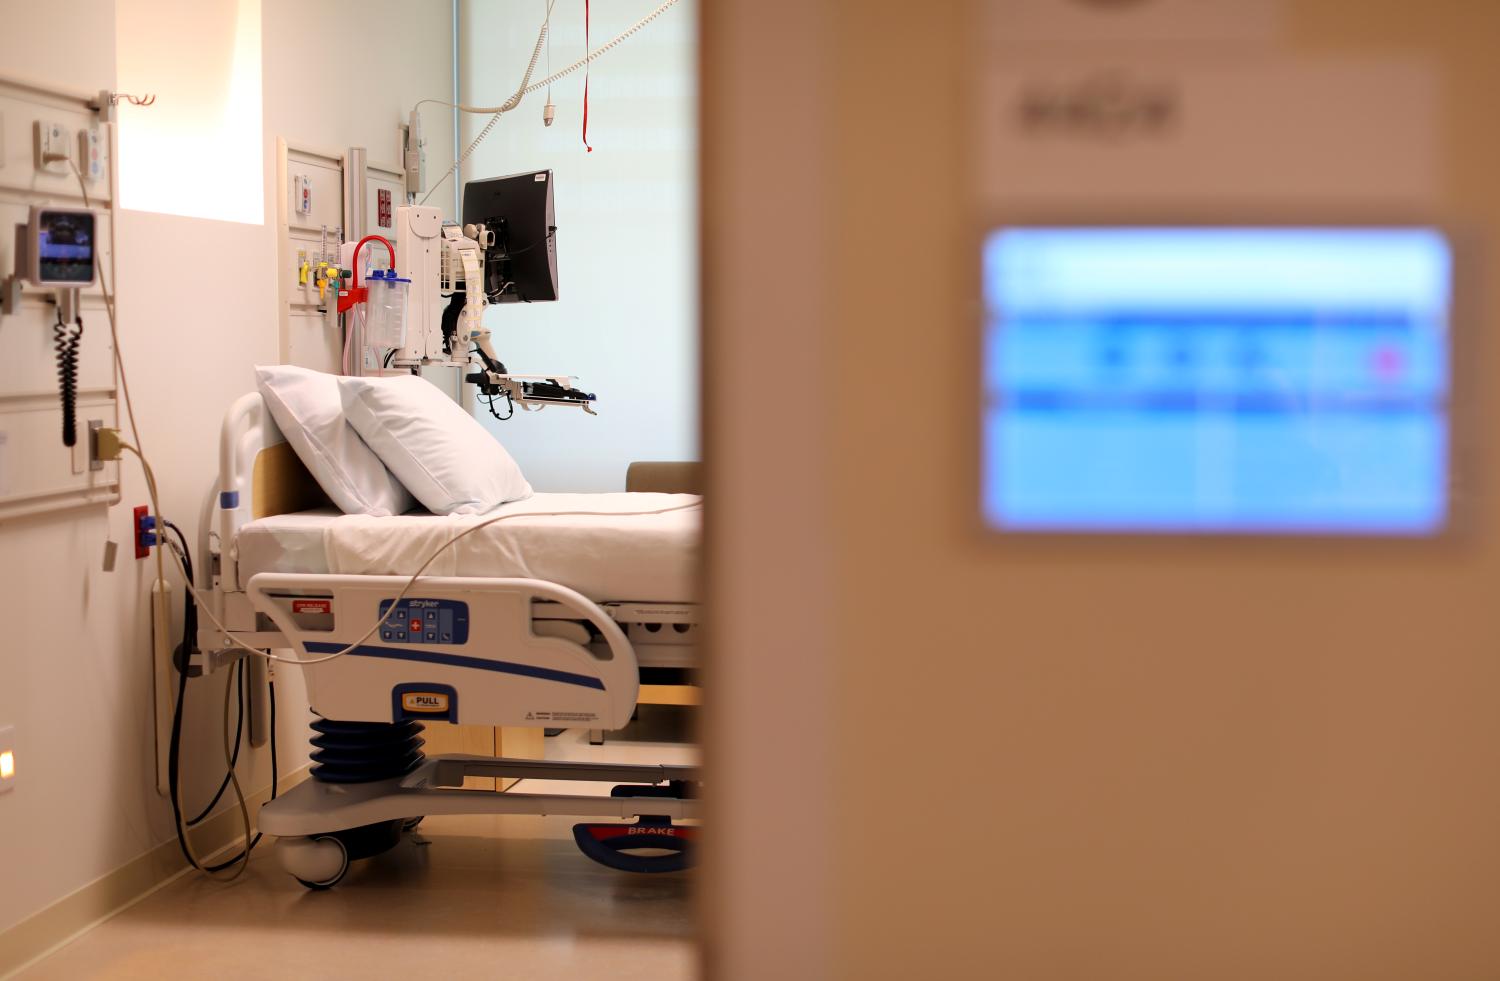 An electronic patients chart is shown on the wall to a hospital room.